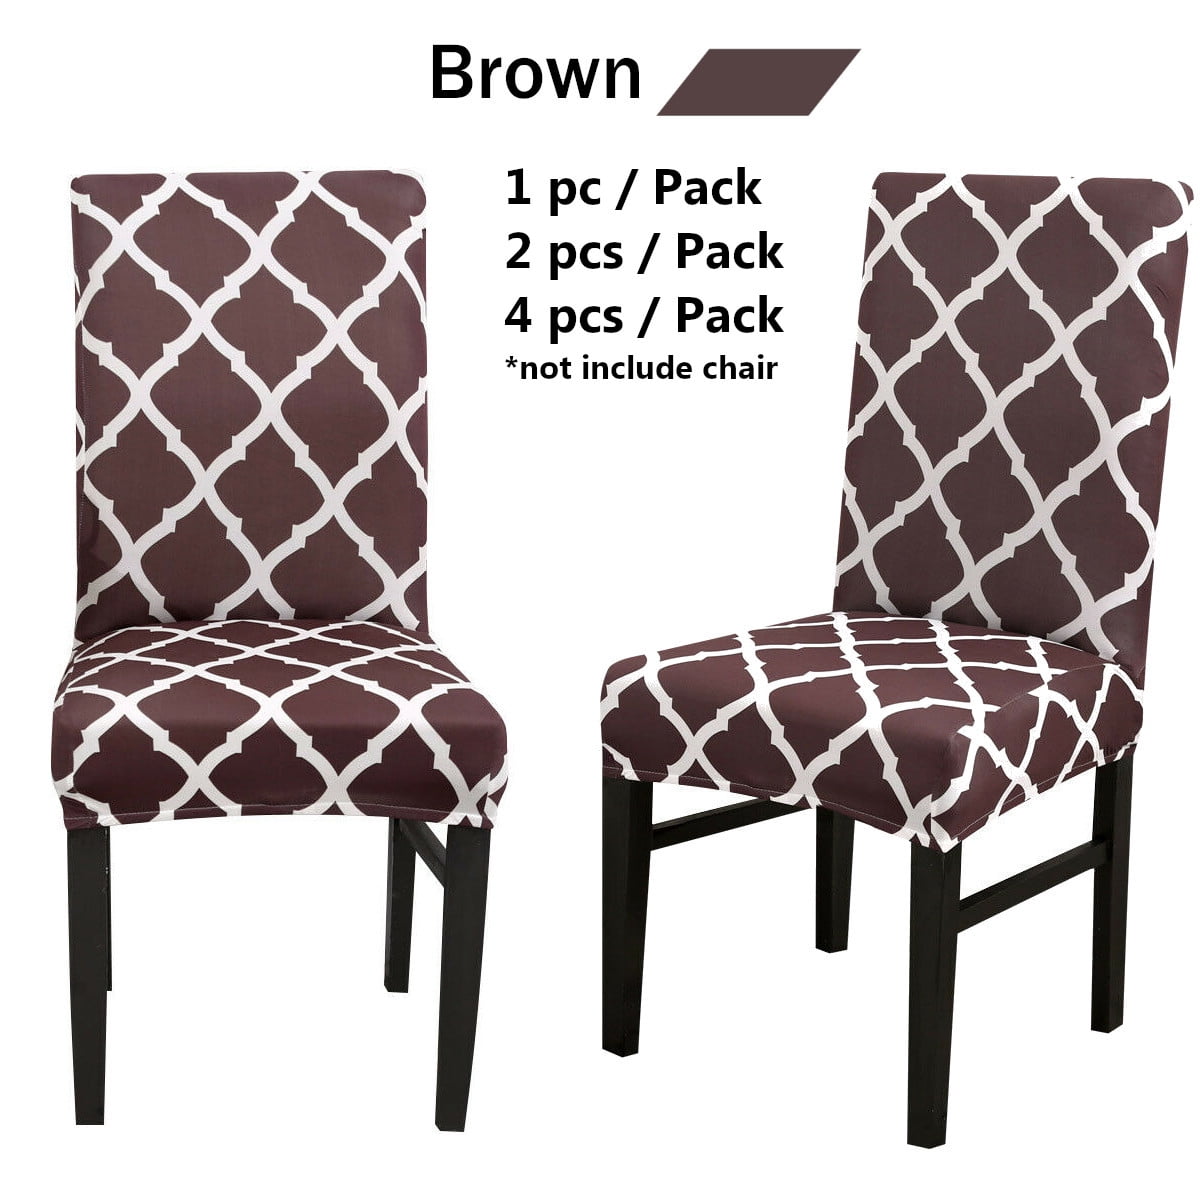 Details about   Soft Chair Cover Modern Chair Slipcovers Bedroom Hotel Seat Decor Multicolor 